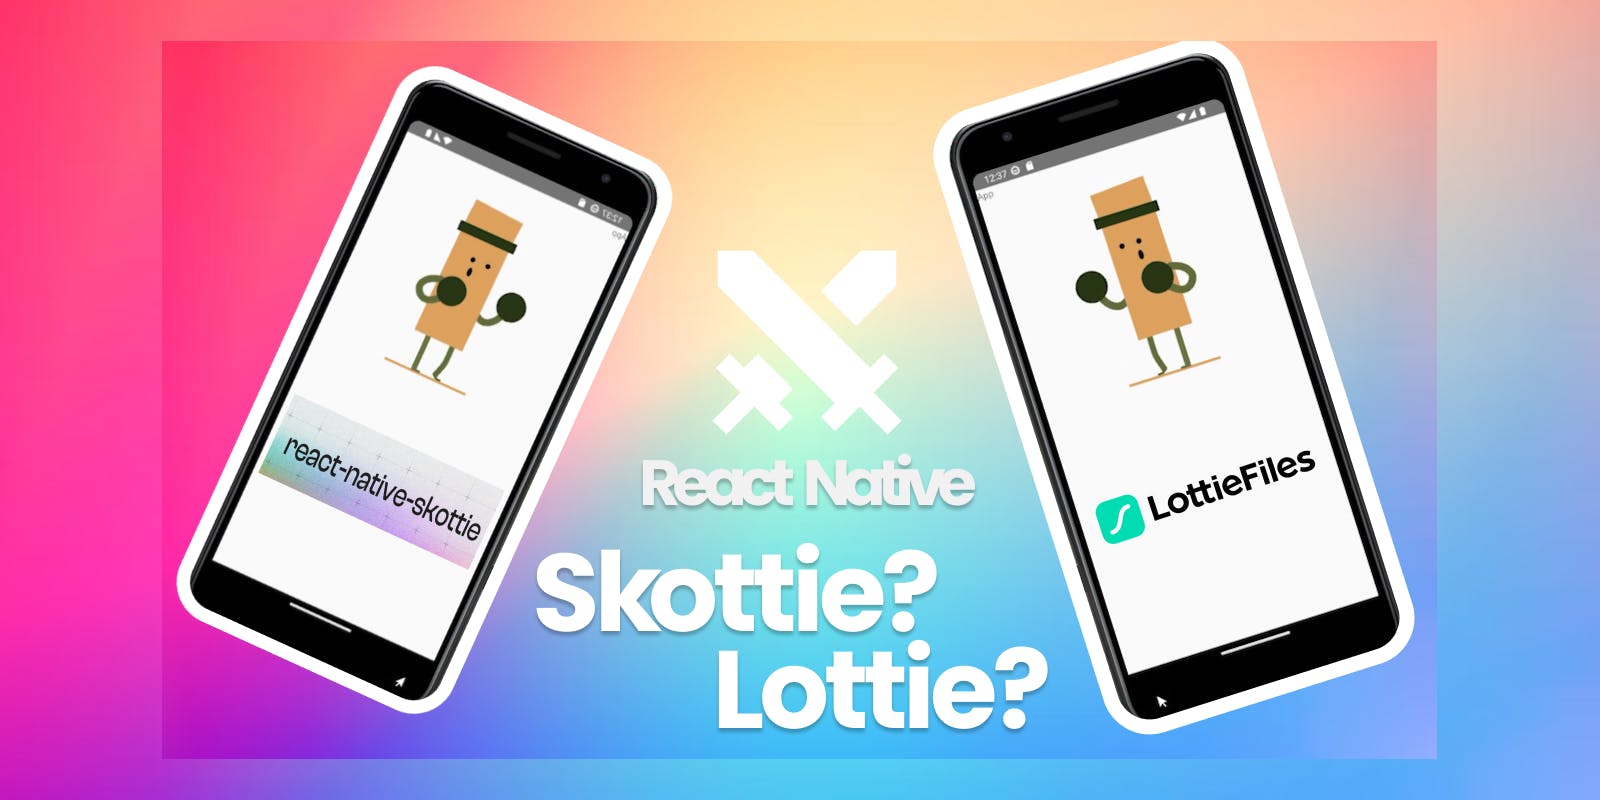 How does react native skottie compare to react native lottie?